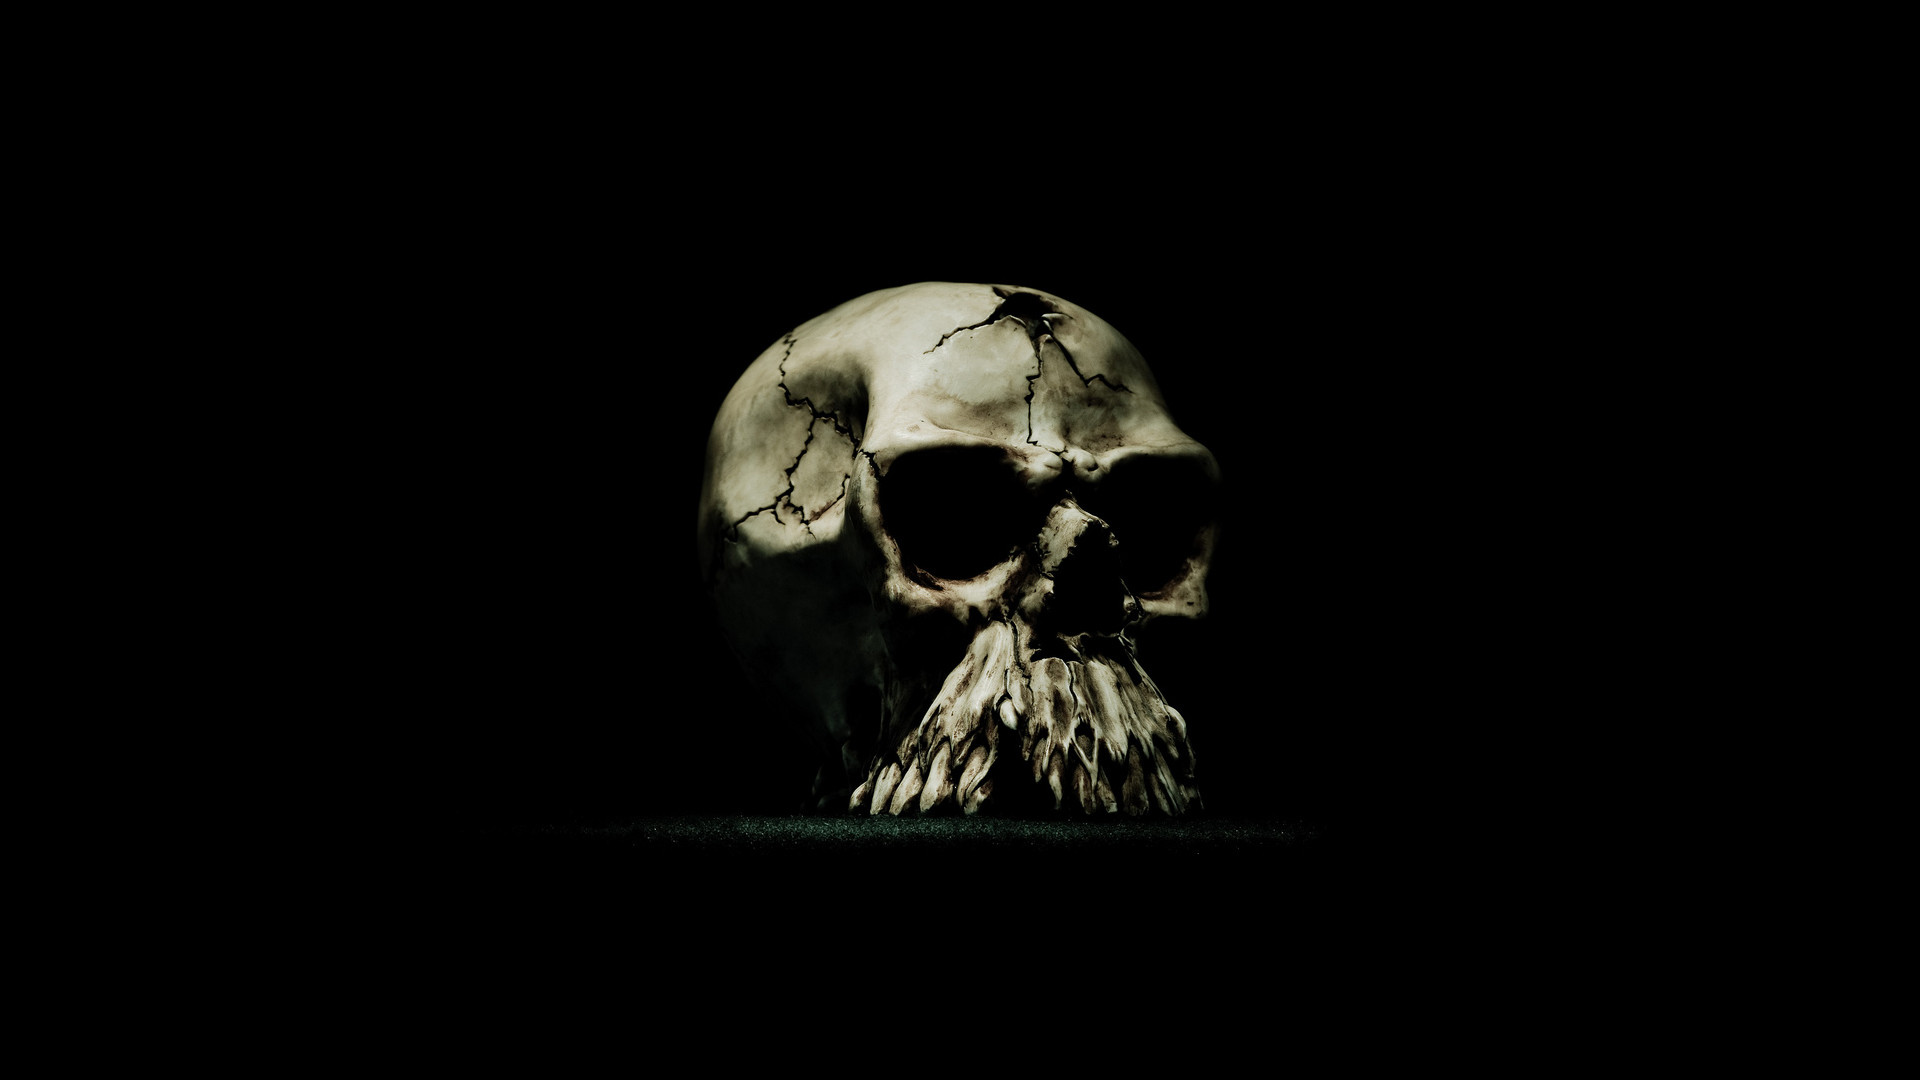 1920x1080 Free Scary Skull Wallpapers, Free Scary Skull HD Wallpapers, Scary .